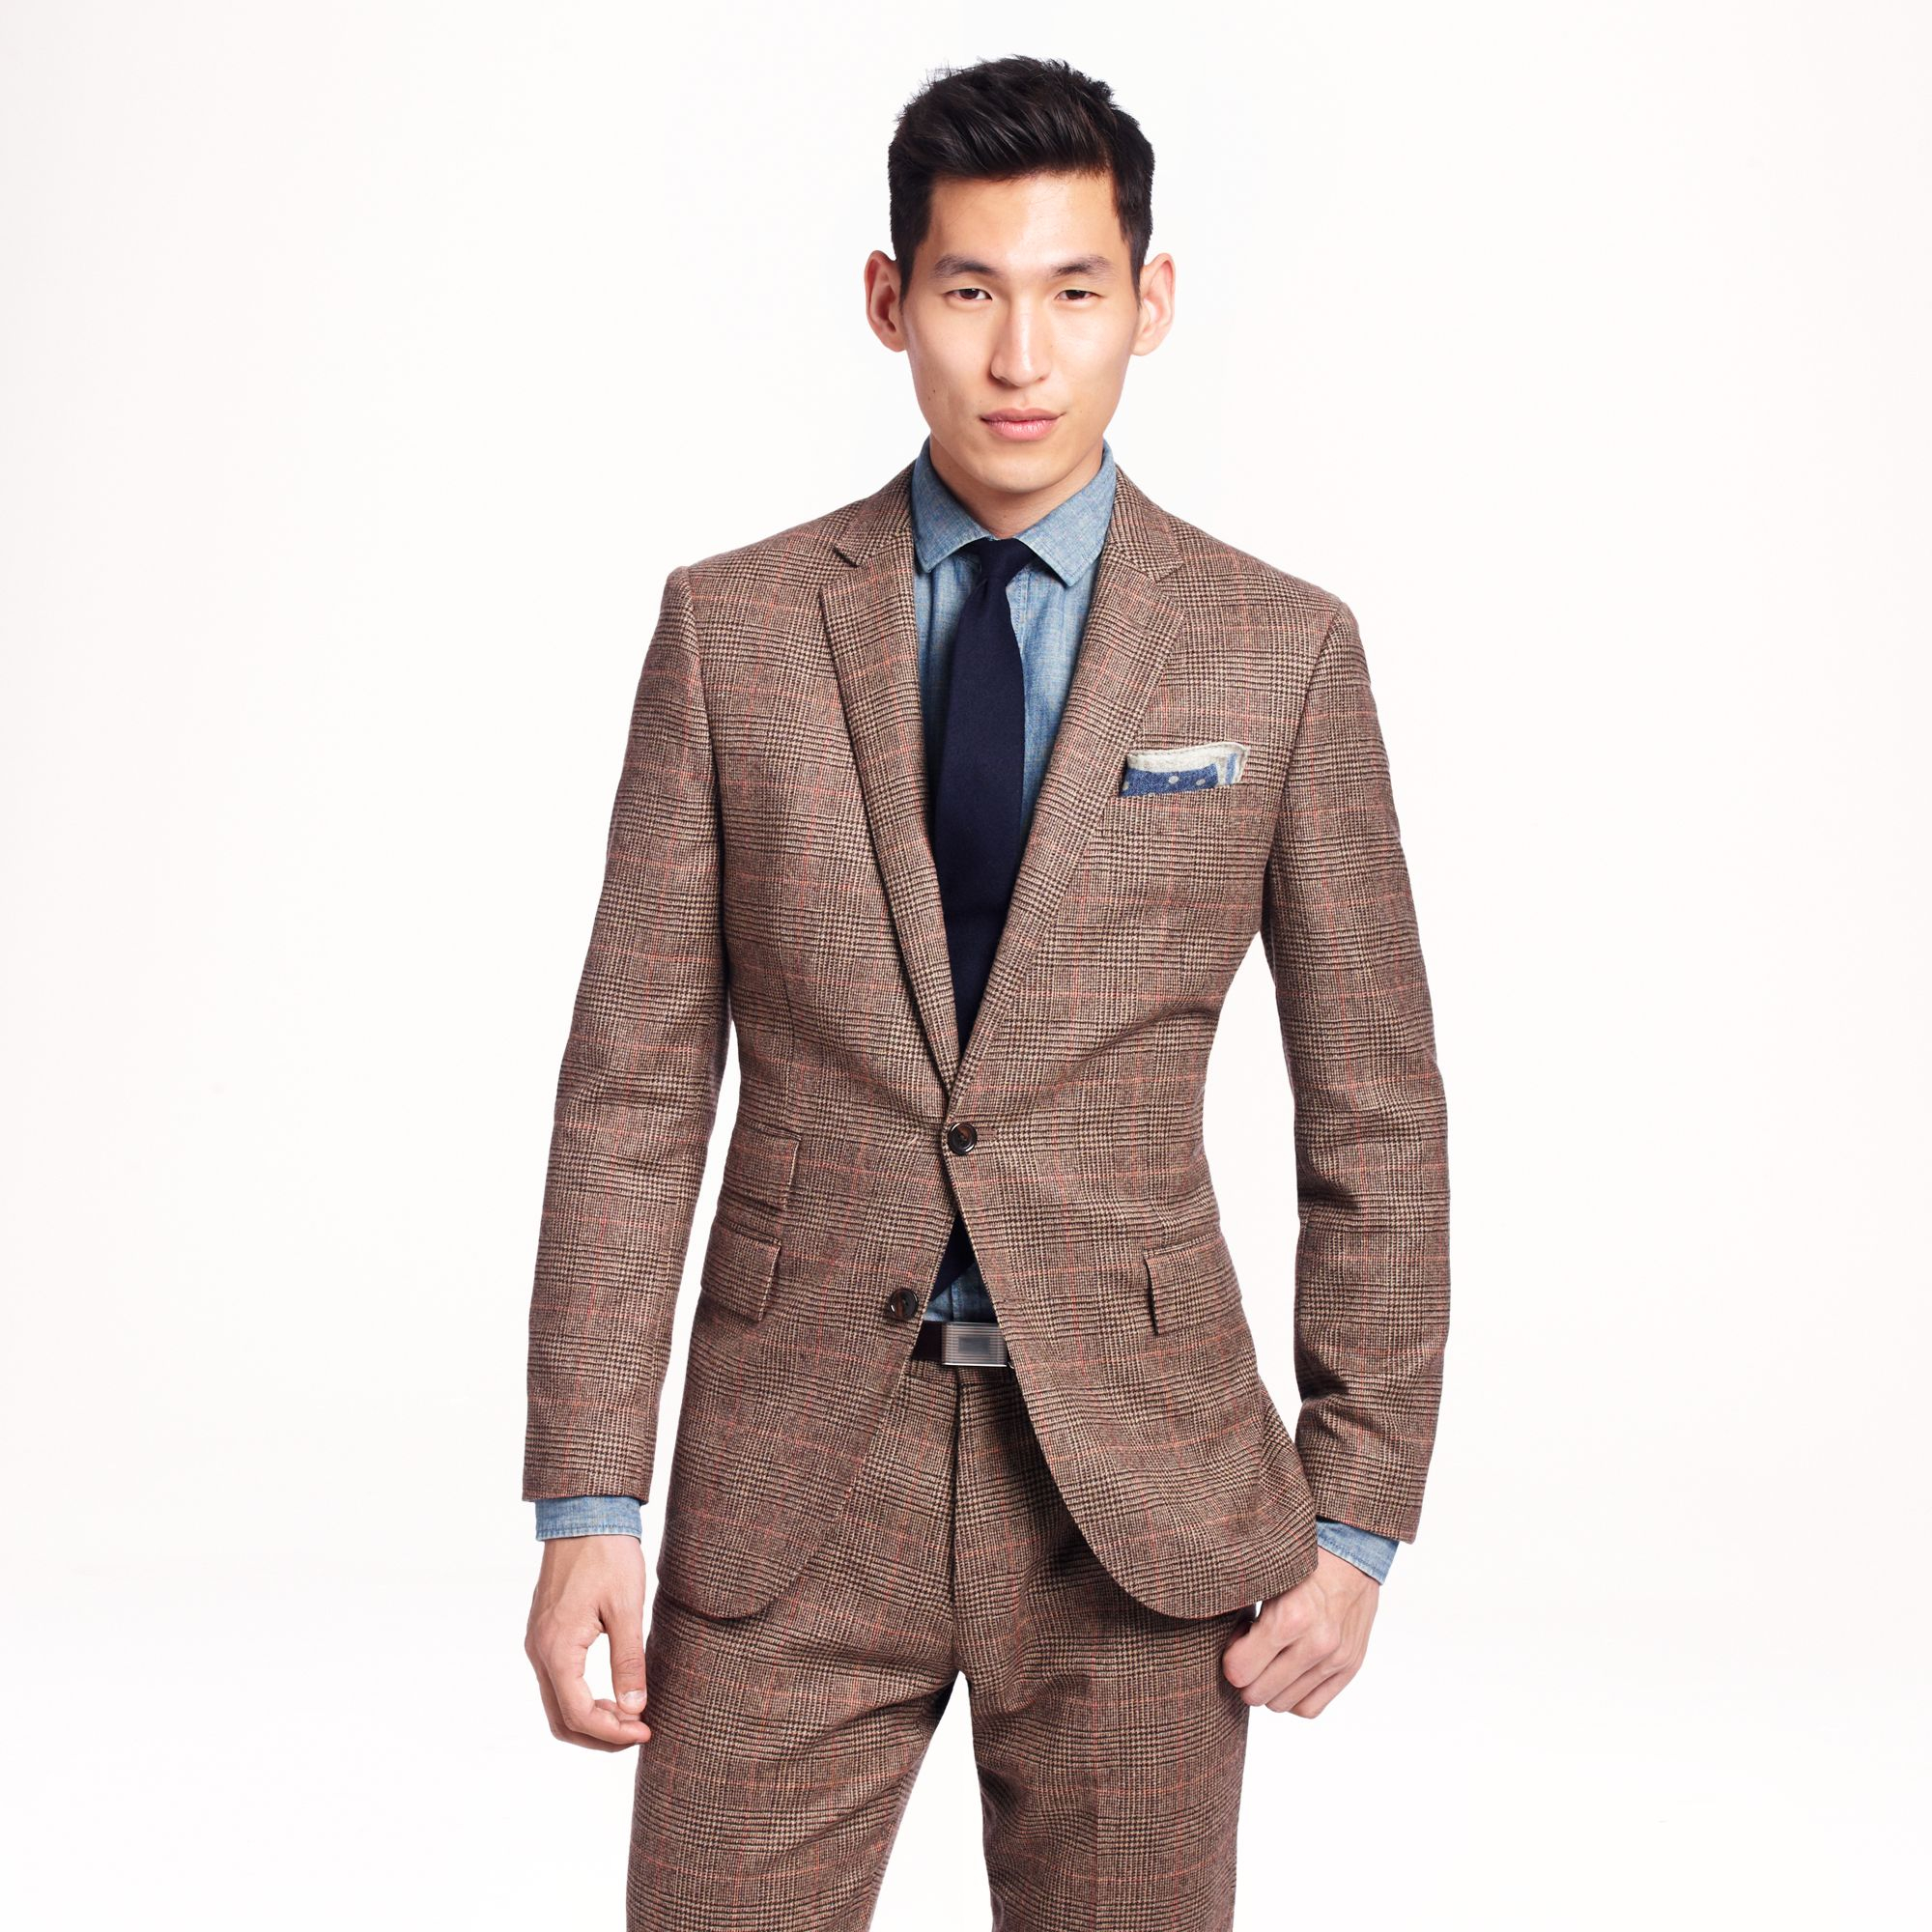 Lyst - J.Crew Ludlow Suit Jacket with Double Vent in Glen Plaid English ...